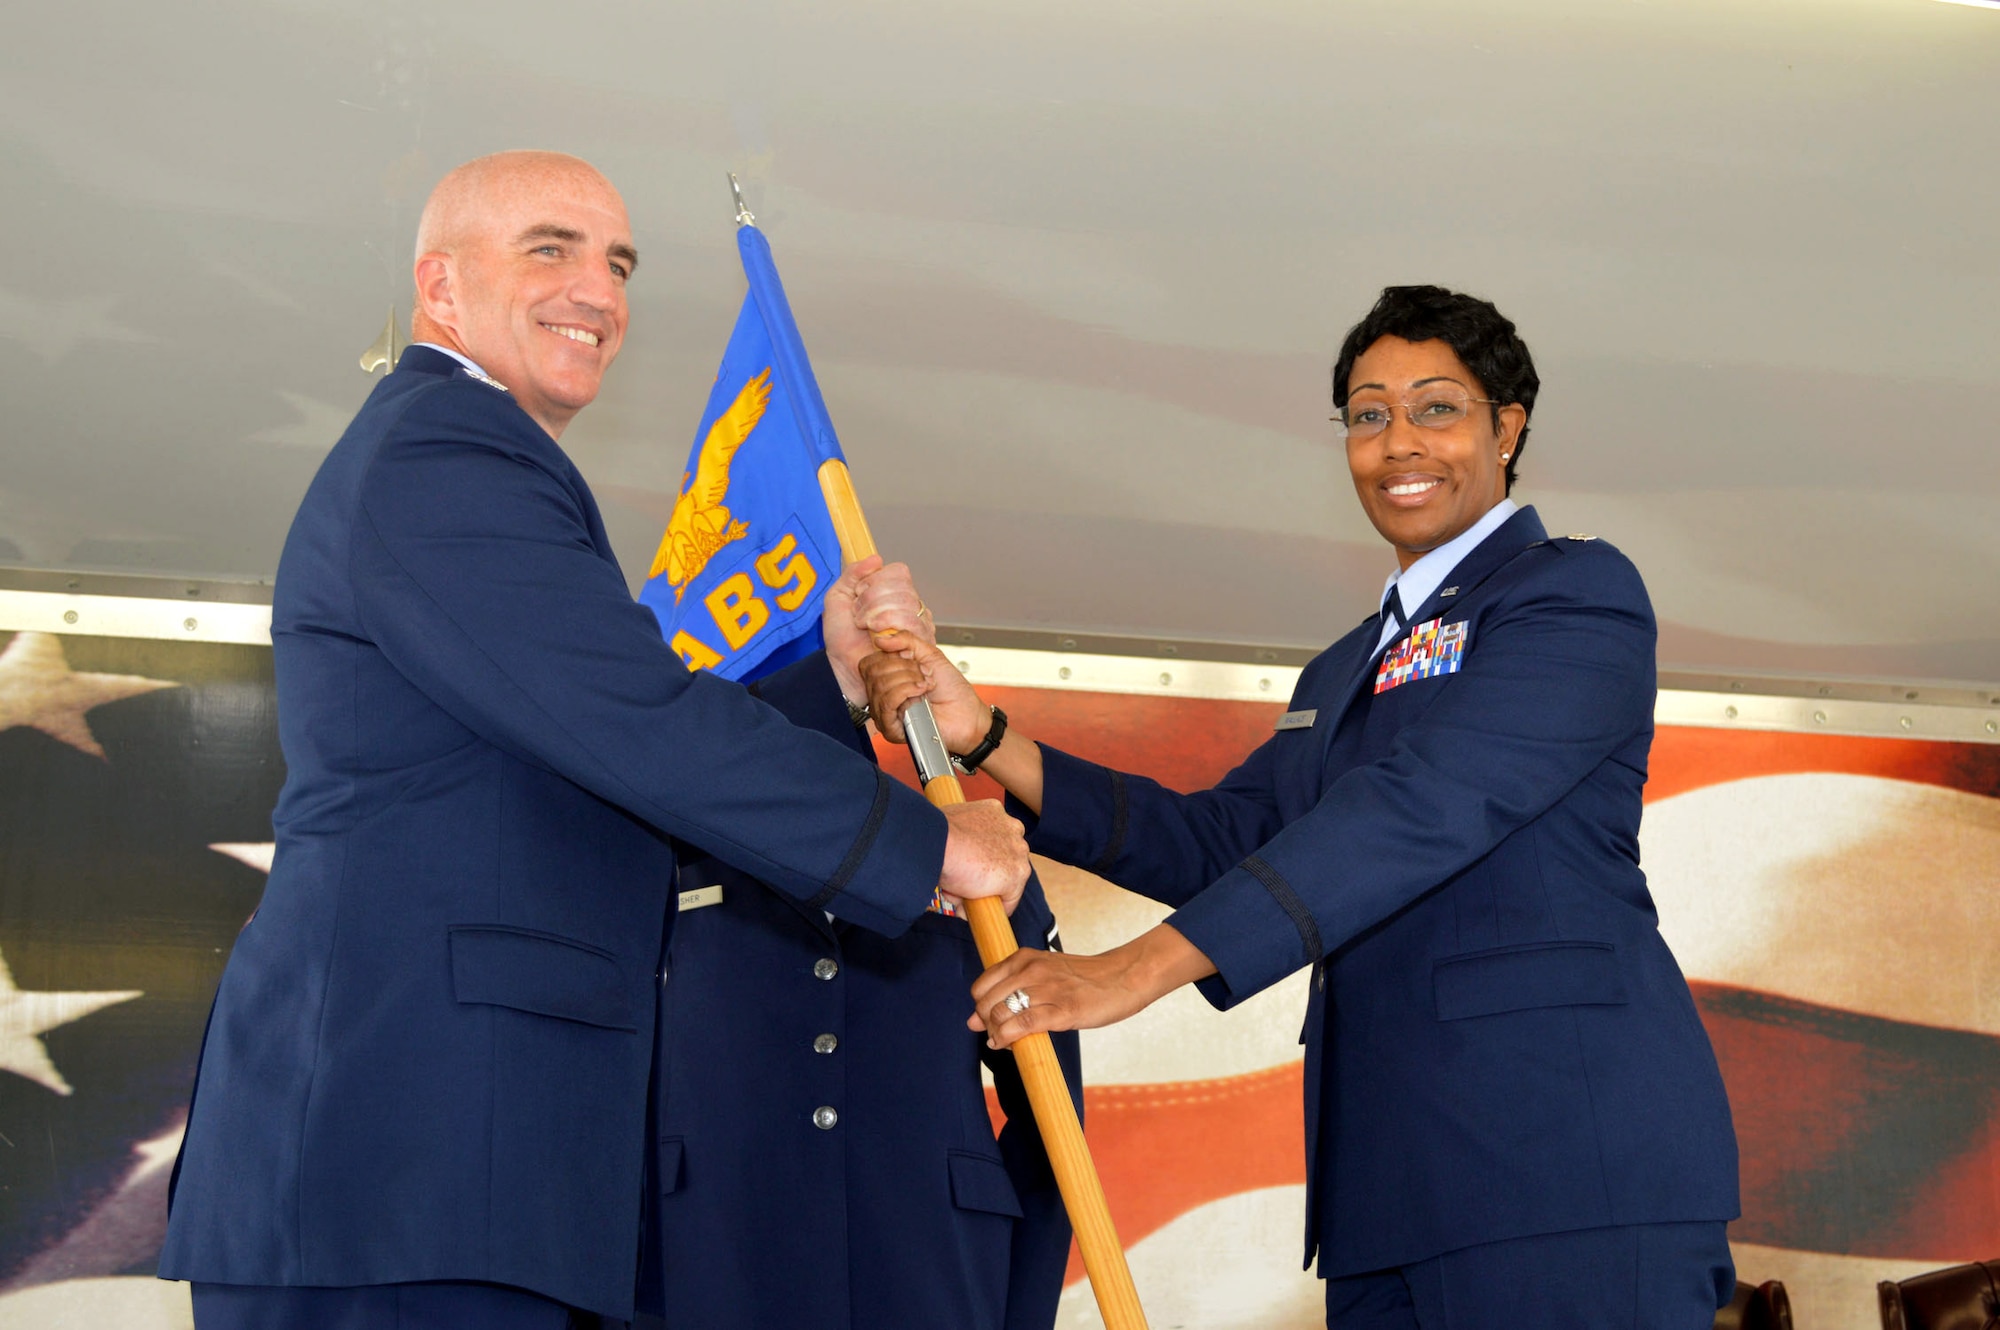 Col. Kenneth Moss, 43rd Airlift Group commander, left, passes the 43rd Air Base Squadron guidon to Lt. Col. Kimberly Wallace during the 43rd Air Base Squadron redesignation and change of command ceremony July 1, 2015, at Pope Army Airfield, North Carolina. Wallace assumed command of the newly established squadron composed of logistics and force support Airmen and functions transferred from the inactivated 43rd Logistics Readiness Squadron and the 43rd Force Support Squadron. (U.S. Air Force photo/Marvin Krause)